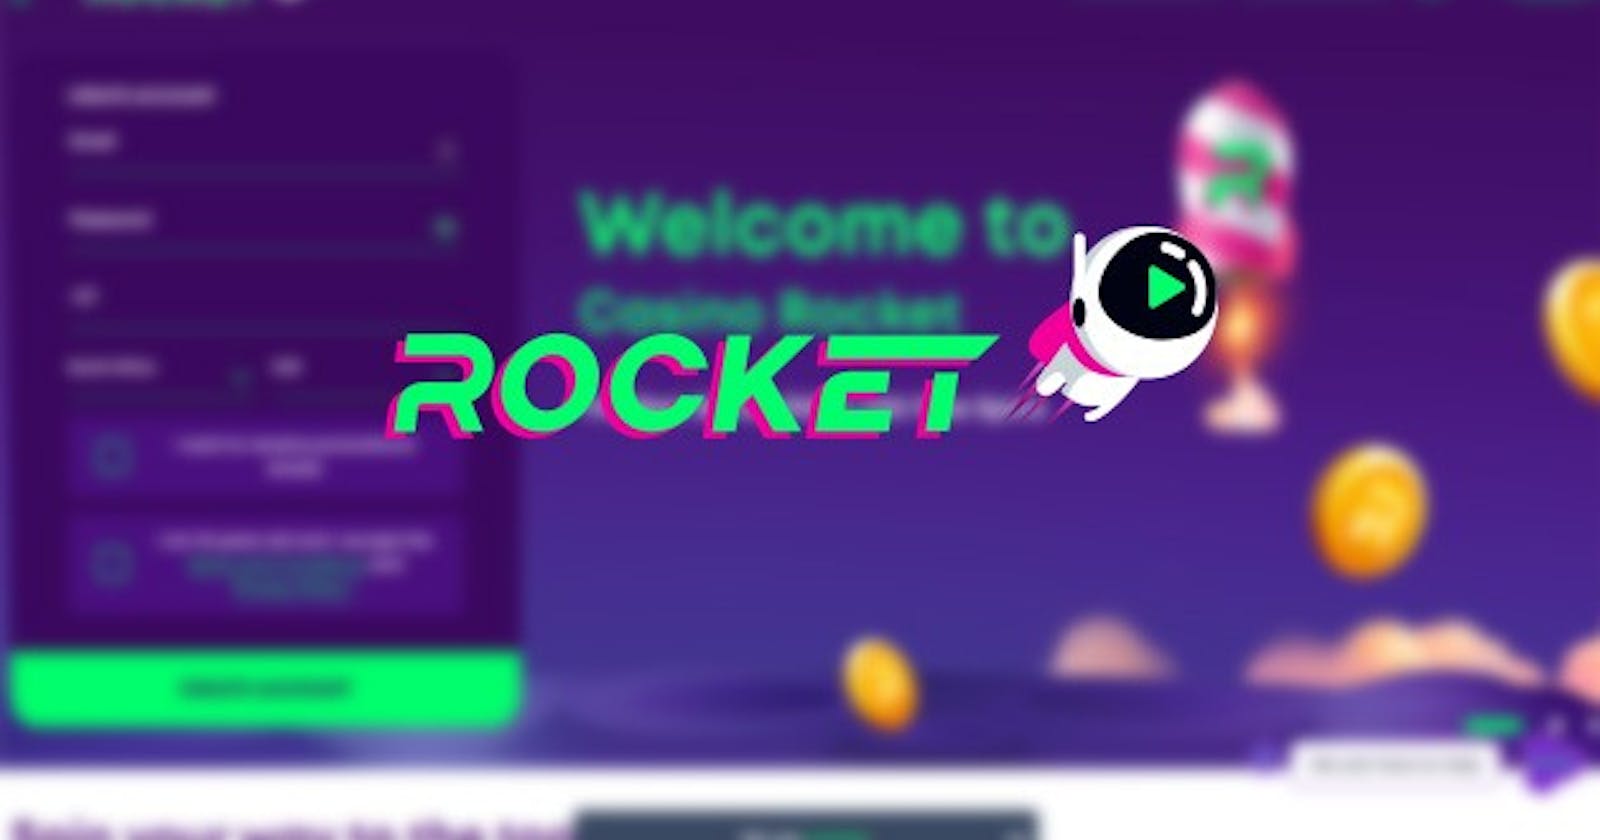 Is it possible to play at a reputable Rocket casino online?